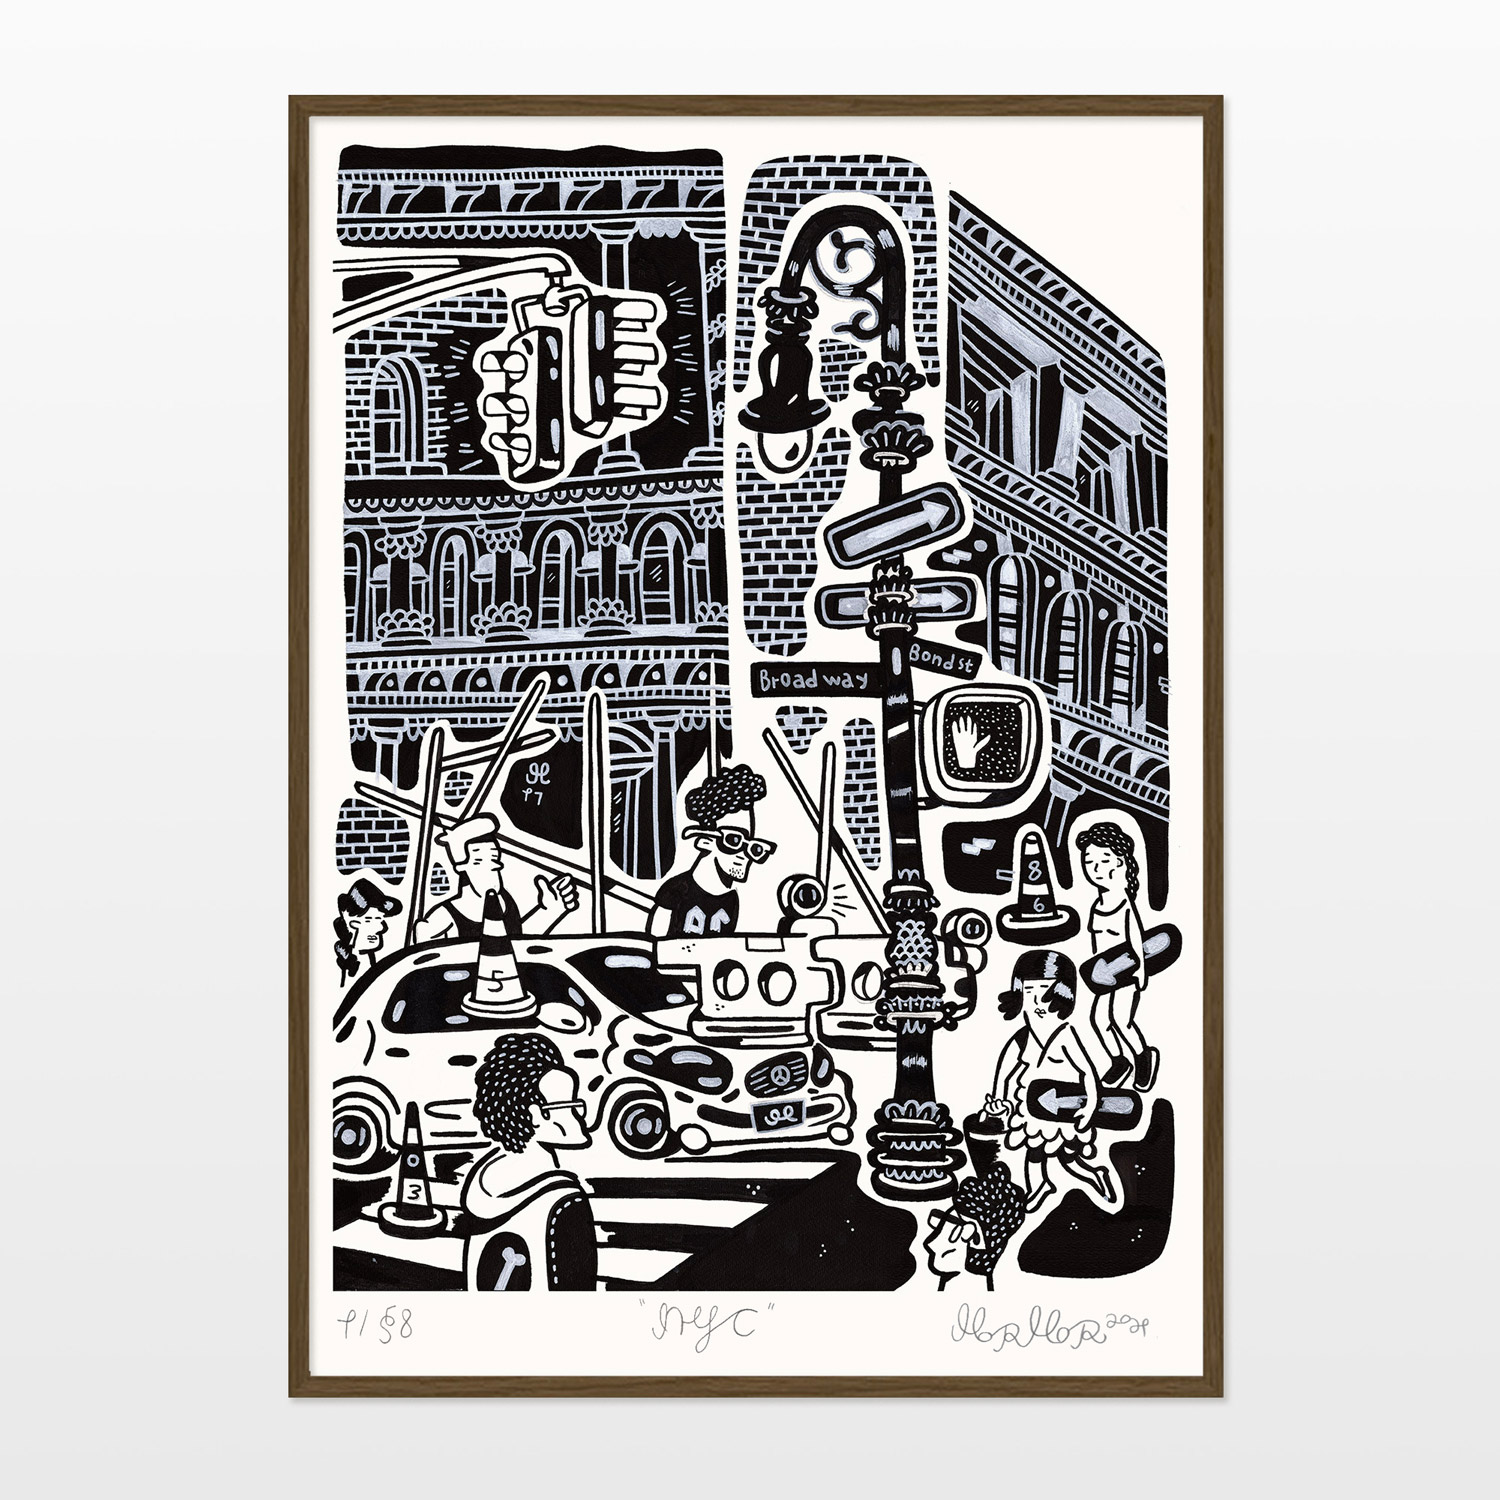 posters-prints, giclee-print, family-friendly, graphical, illustrative, monochrome, pop, architecture, cartoons, humor, people, black, grey, ink, paper, architectural, cities, contemporary-art, danish, decorative, design, interior, interior-design, modern, modern-art, nordic, scandinavien, Buy original high quality art. Paintings, drawings, limited edition prints & posters by talented artists.